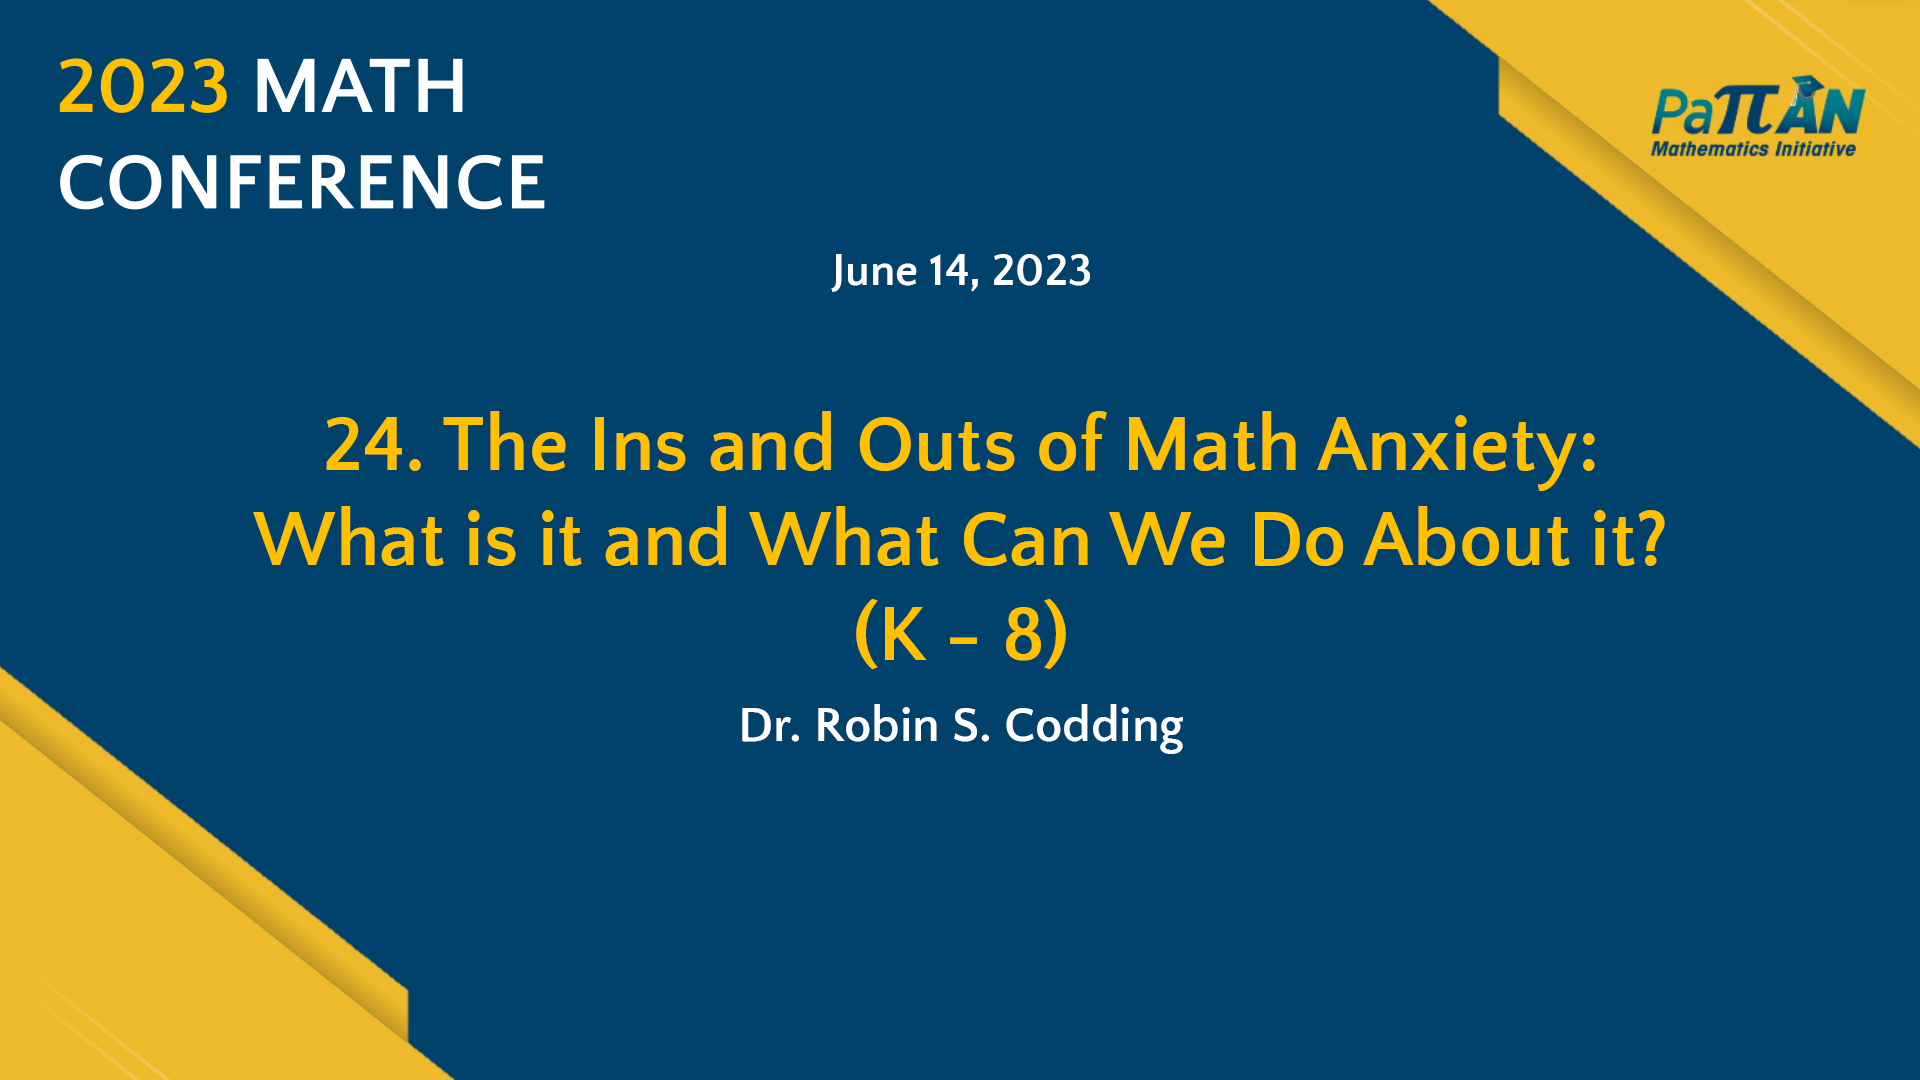 24. The Ins and Outs of Math Anxiety: What is it and What Can We Do About it? | Math Conference 2023